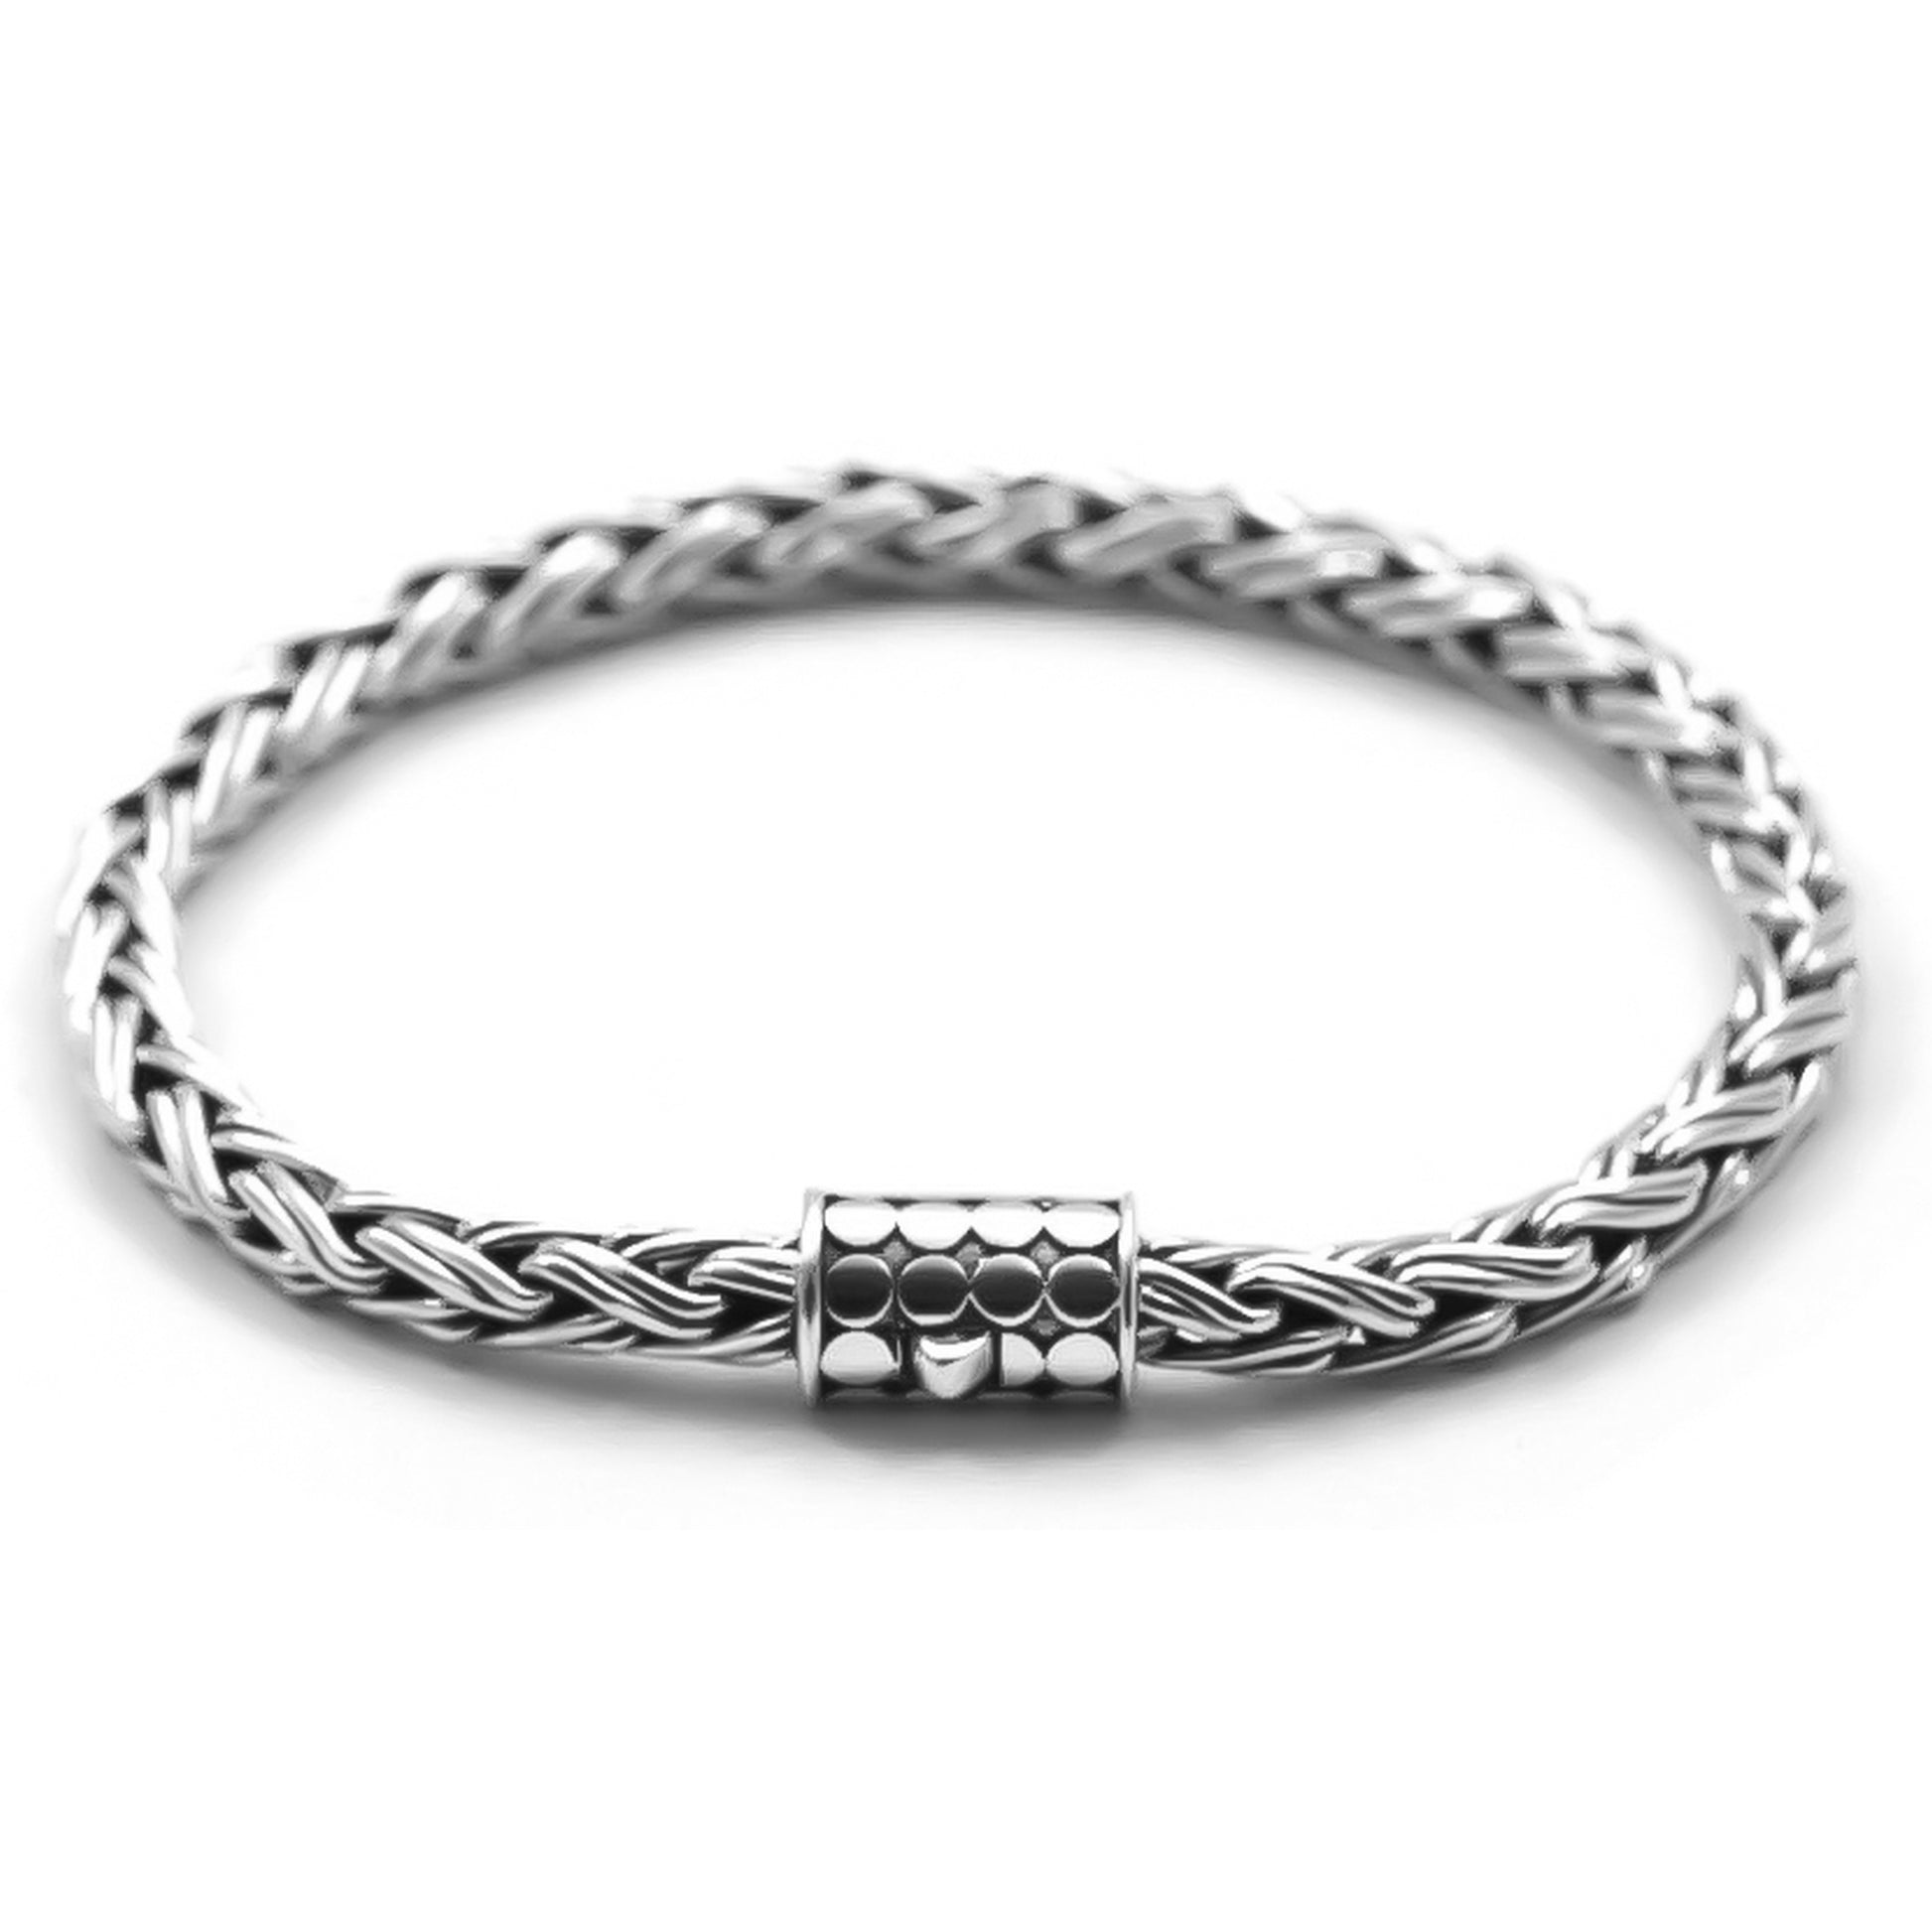 Silver thick wheat chain bracelet with a single button barrel clasp.